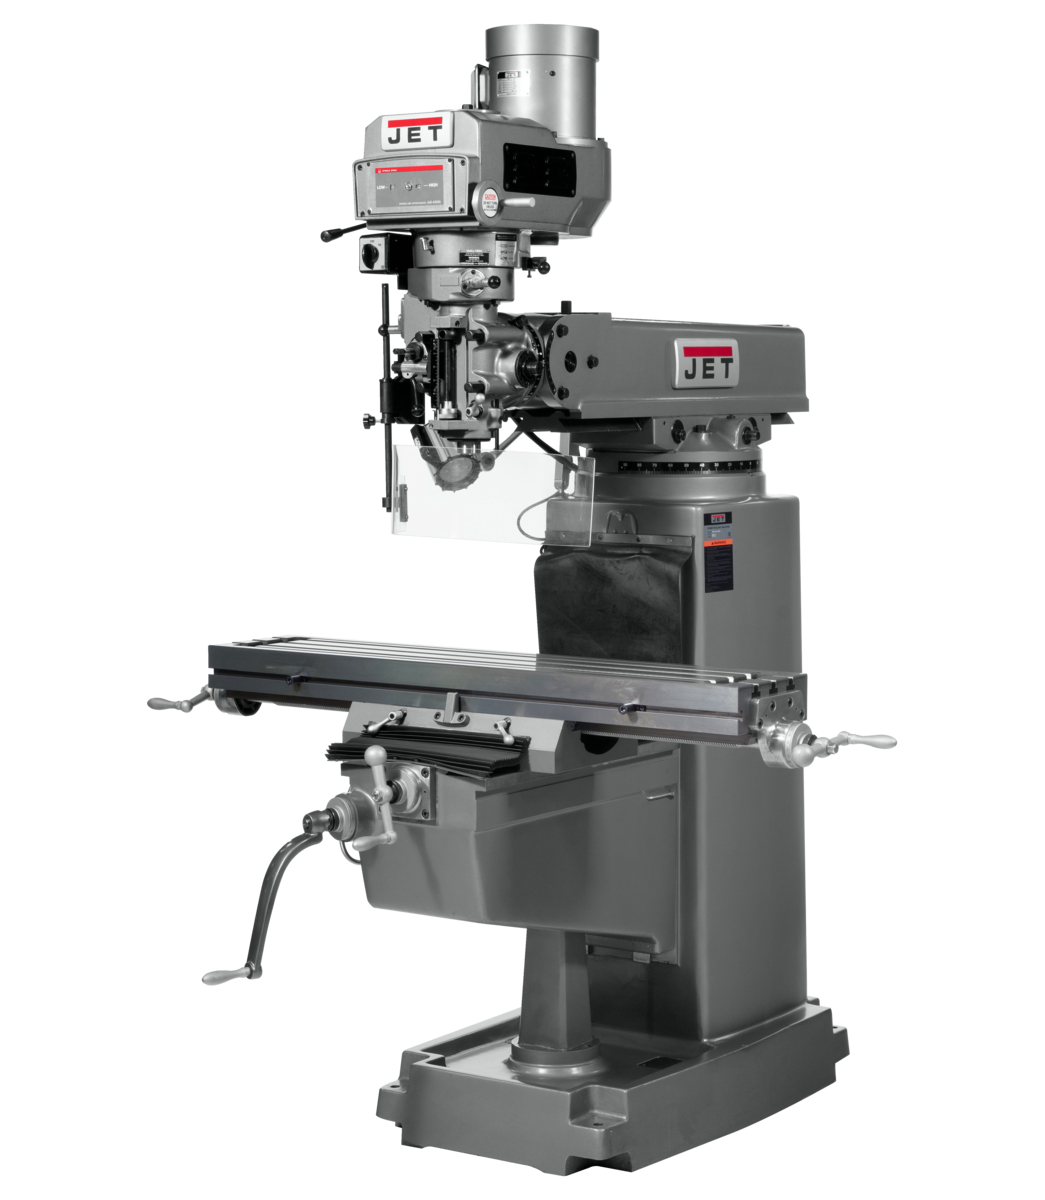 690258, The Jet JTM-1050 Mill With ACU-RITE 203 DRO With X, Y and Z-Axis Powerfeeds and Power Draw Bar in Metalworking, Milling, Vertical Mills